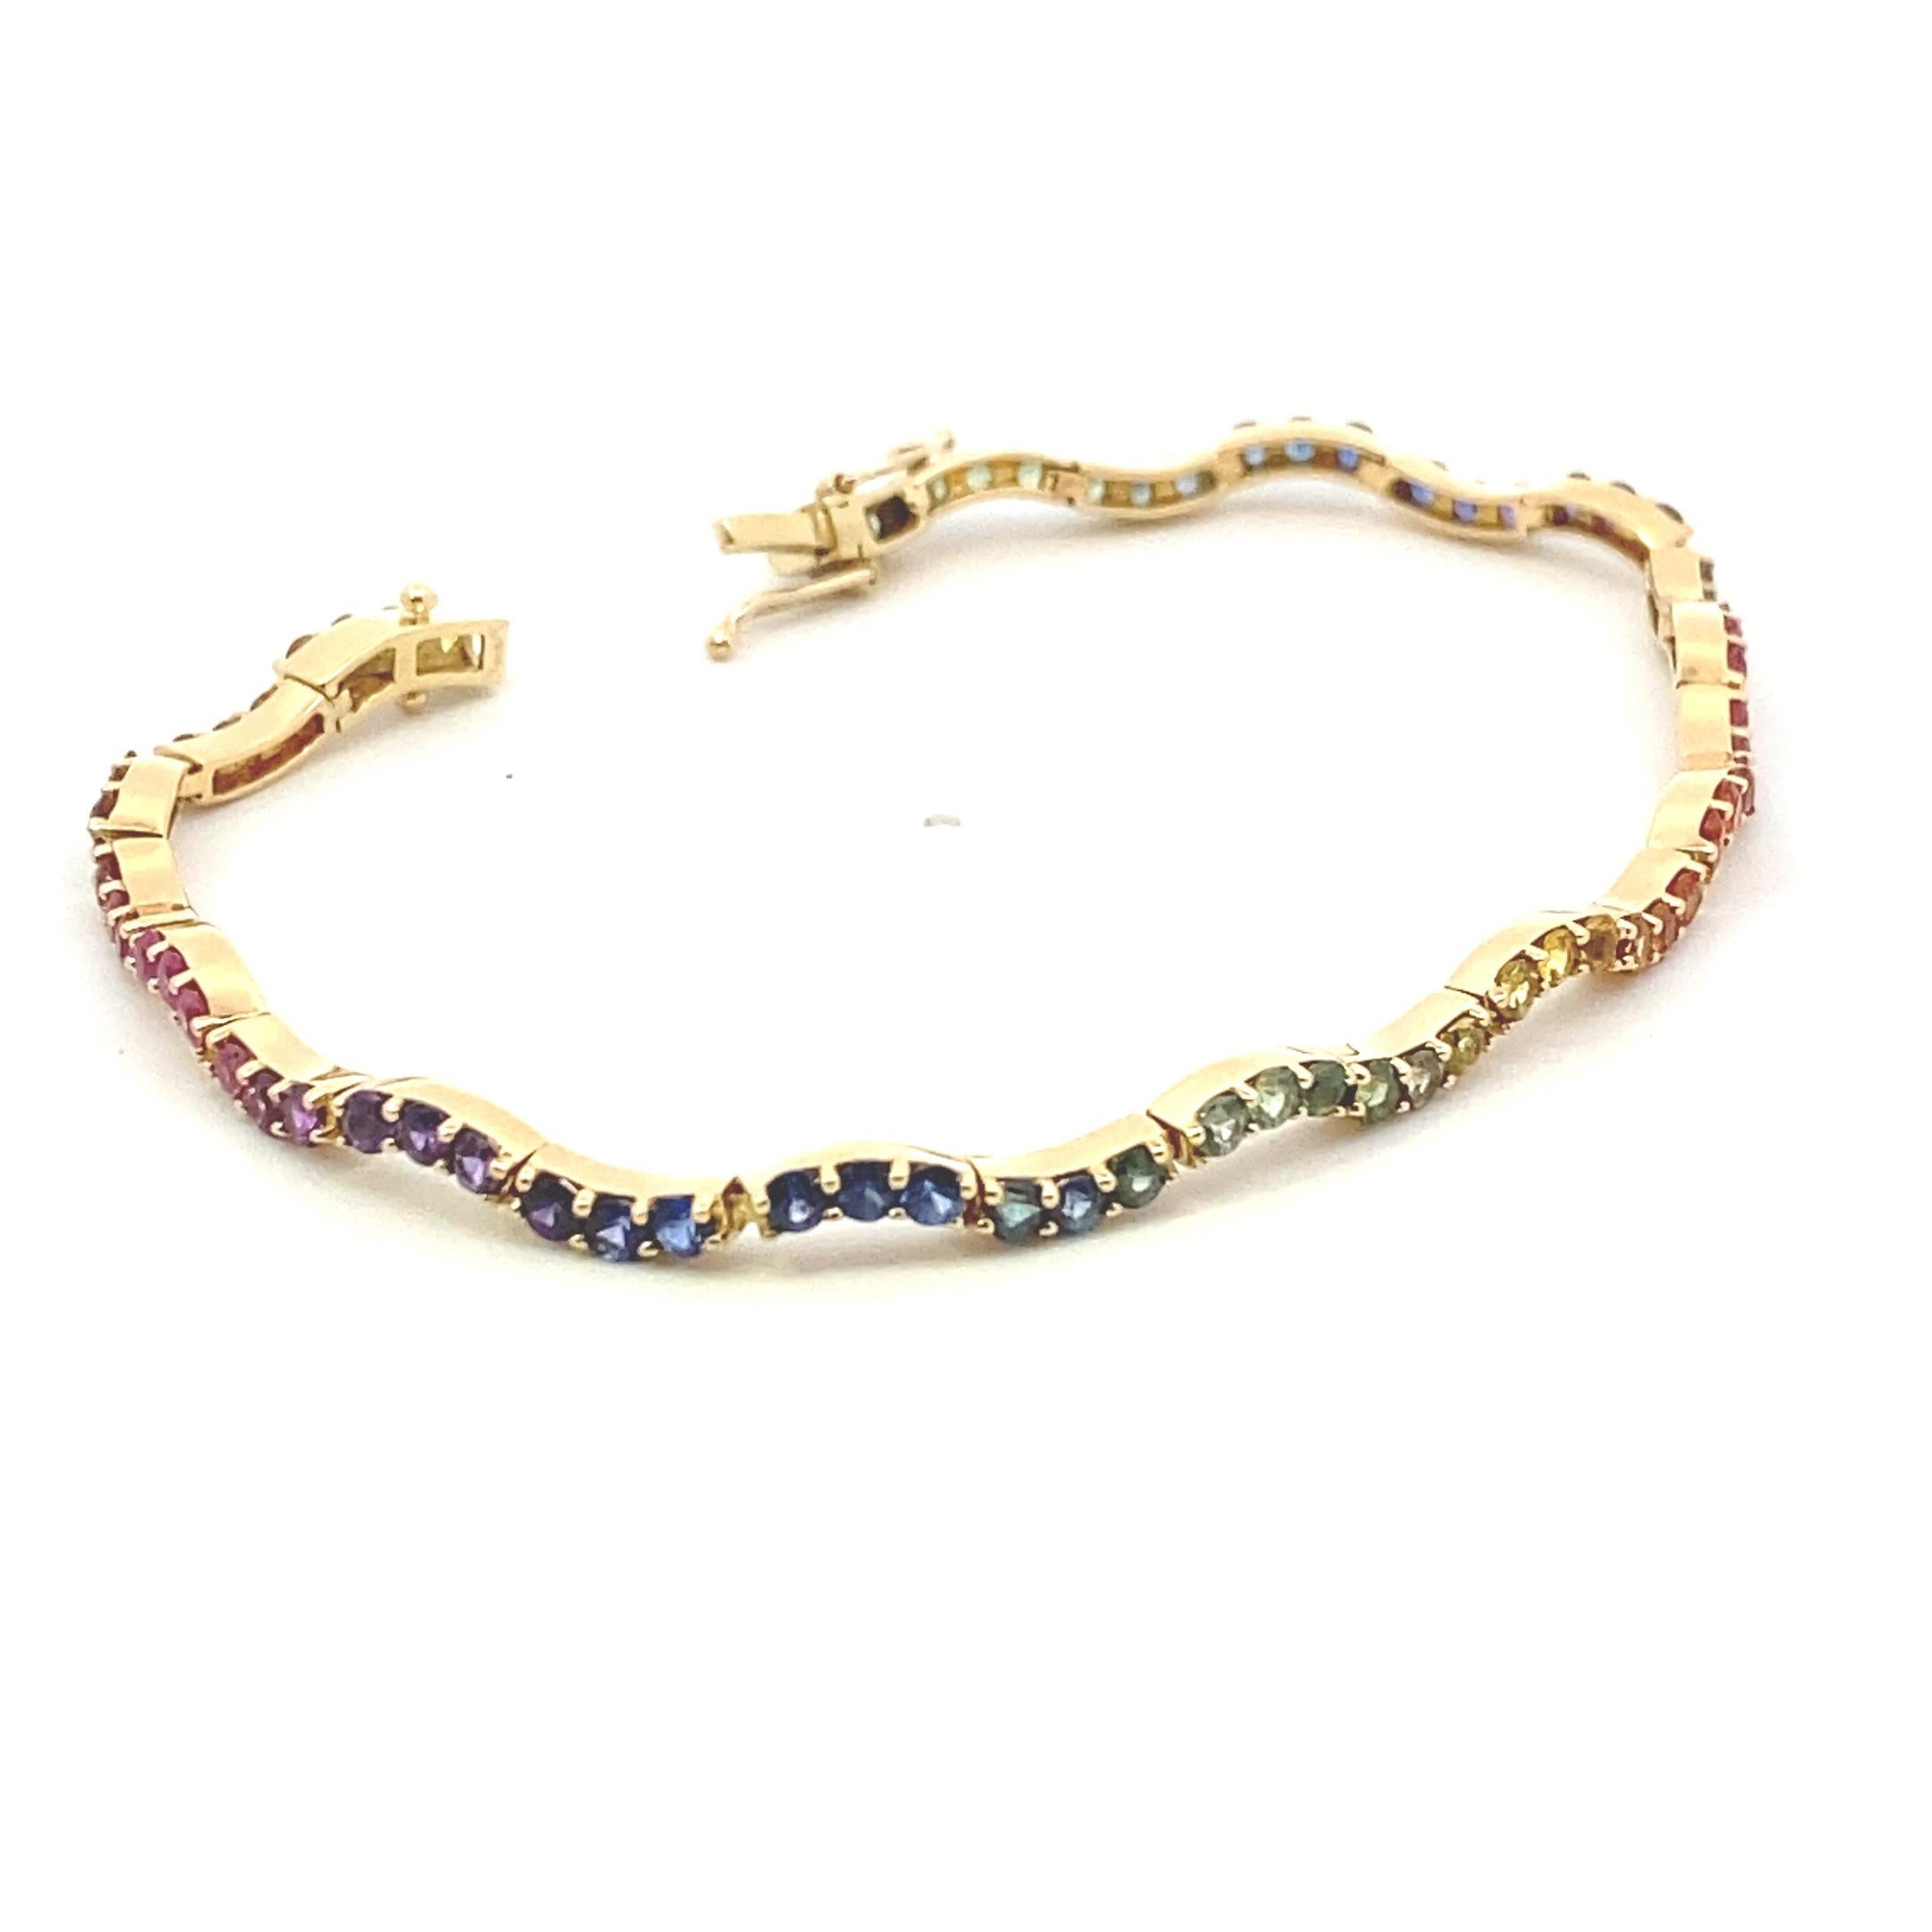 Estate 14k yellow gold 7 inch rainbow sapphire tennis bracelet with 72= 2.88 carat total weight multi-colored sapphires. 